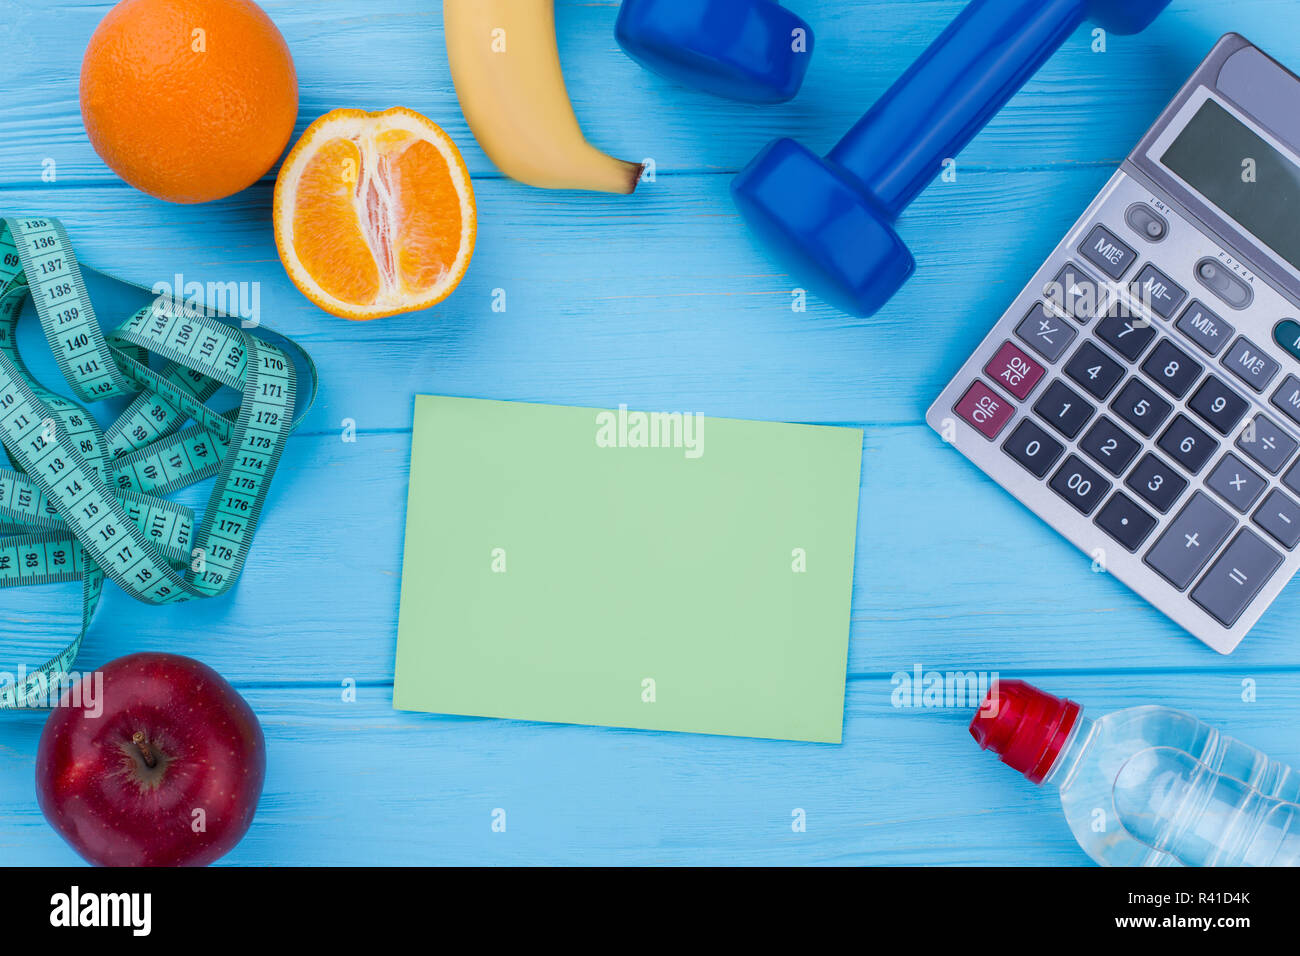 Gym equipment, fruits, measuring tape, calculator. Healthy eating, dieting, slimming and weight loss concept. Stock Photo